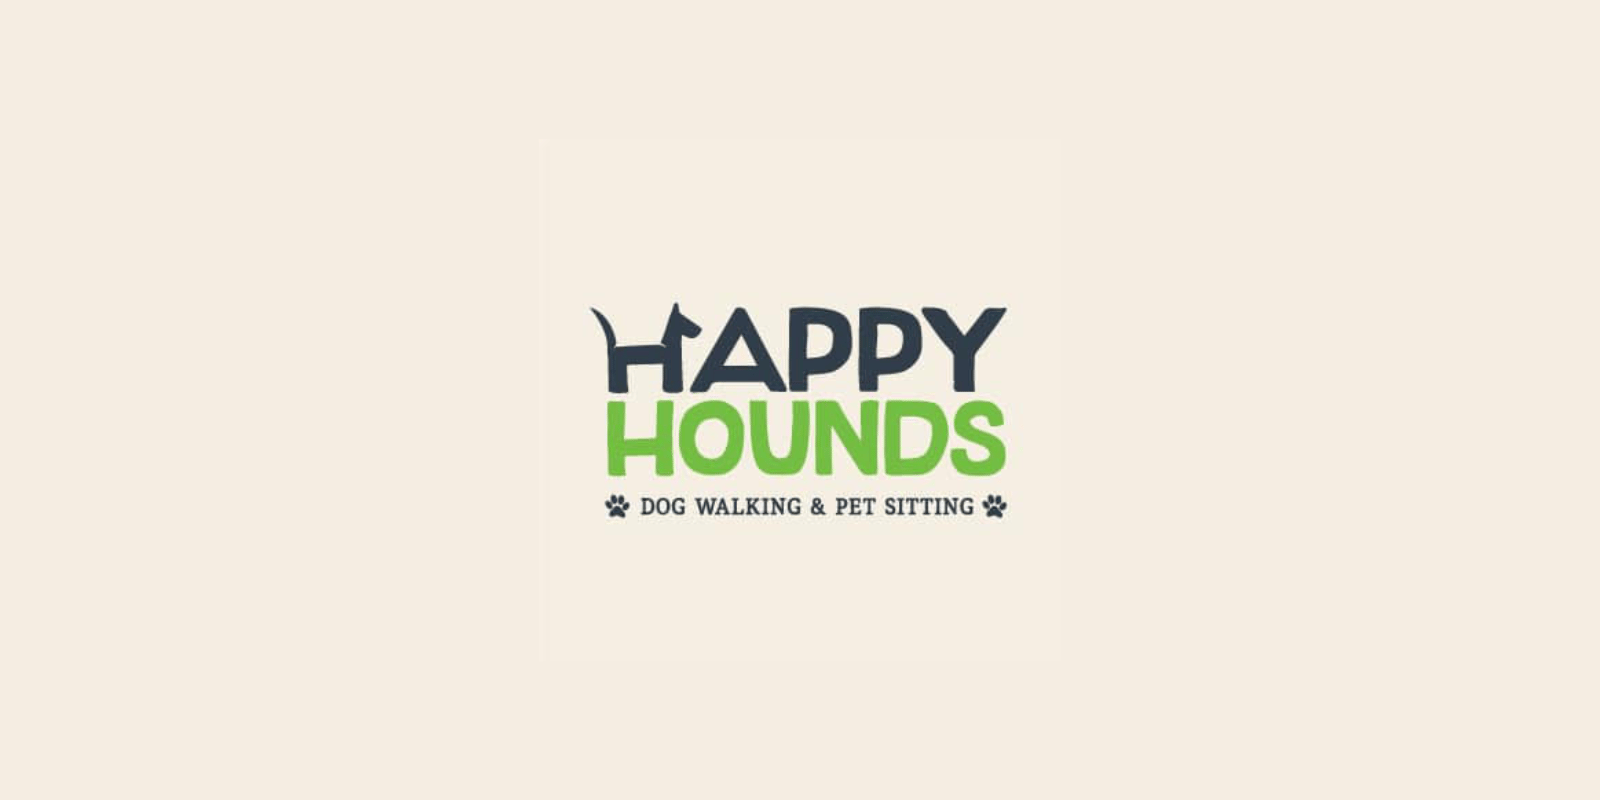 Happy Hounds Dog Walking and Pet Sitting Logo.png